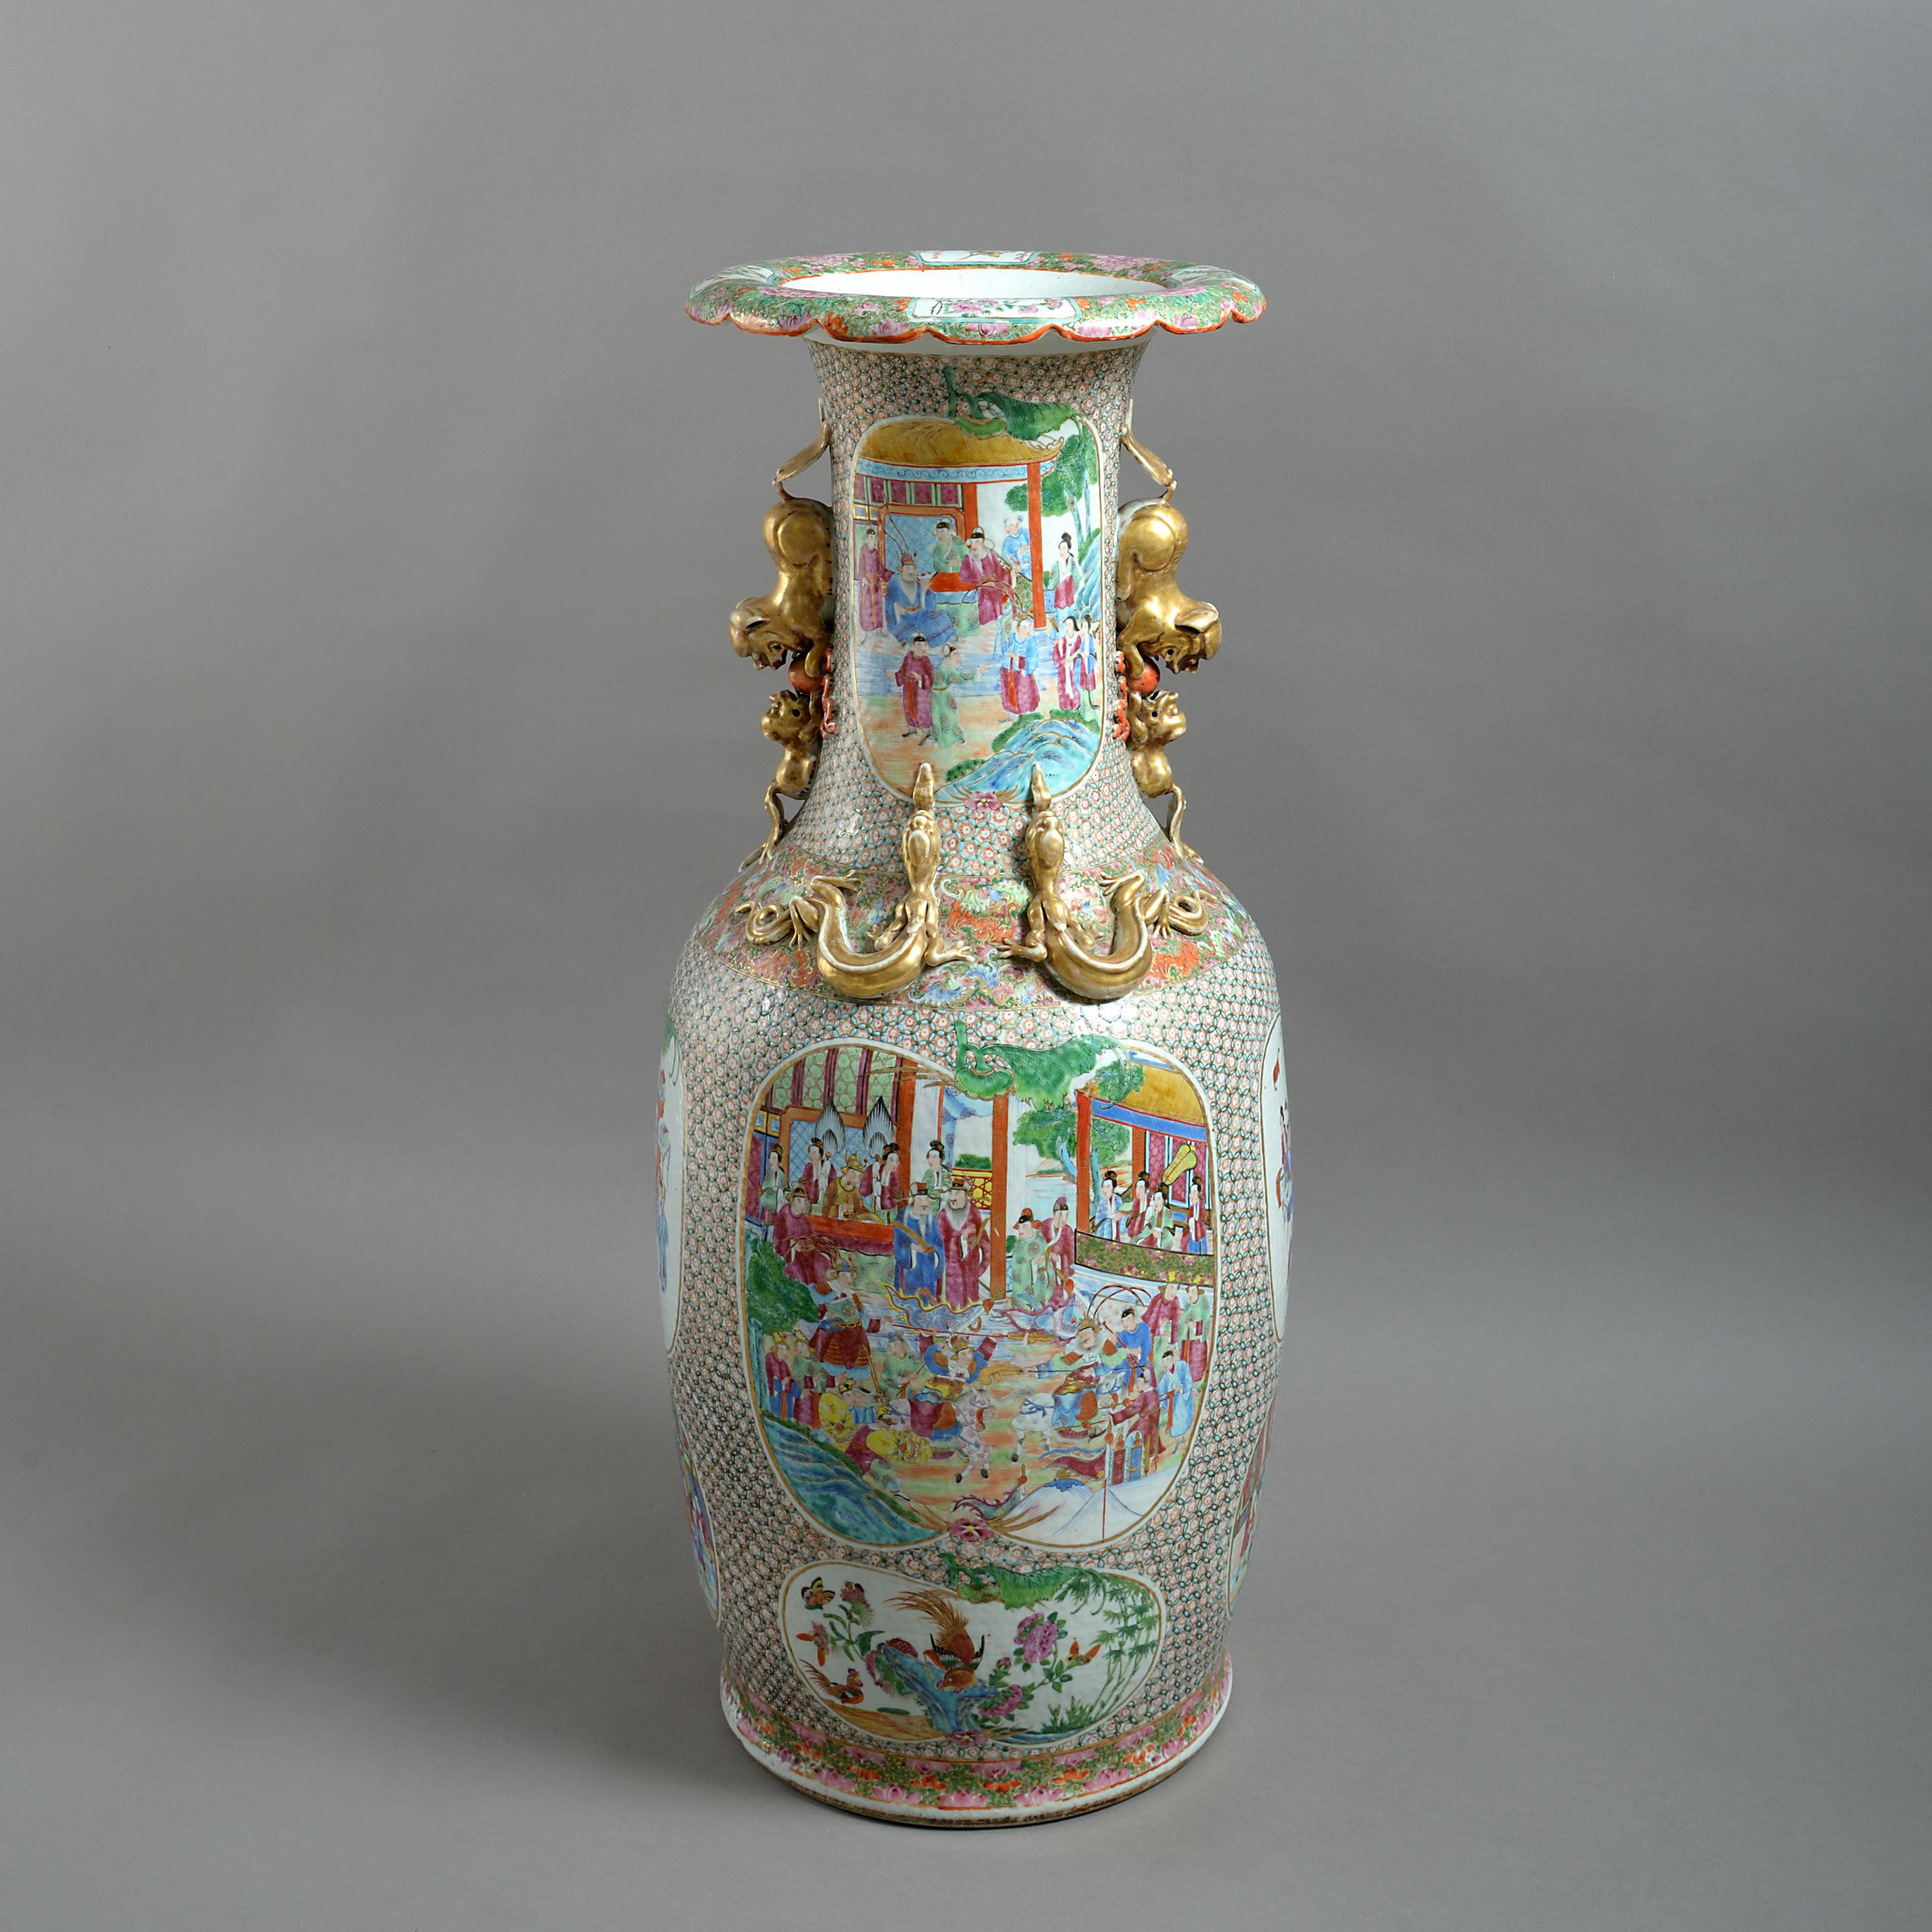 A 19th century famille rose porcelain soldier vase, the body profusely decorated with cartouches depicting court scenes, exotic birds and flowers, having a shaped rim and gilded handles. 

Late Qing dynasty.